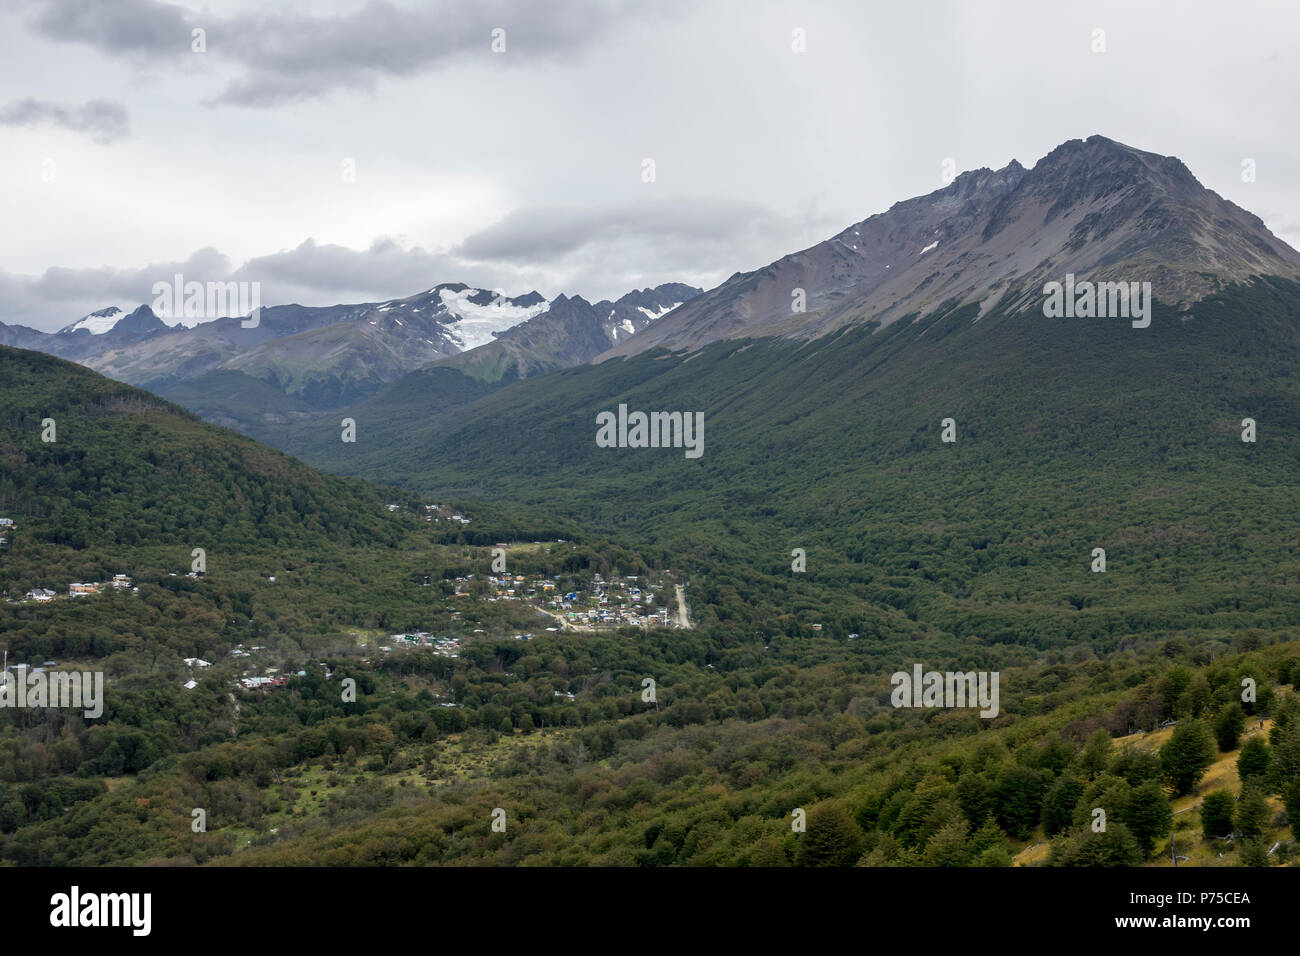 View over the valley and moutain range from Hotel Arakur, Ushuaia, Argentina Stock Photo